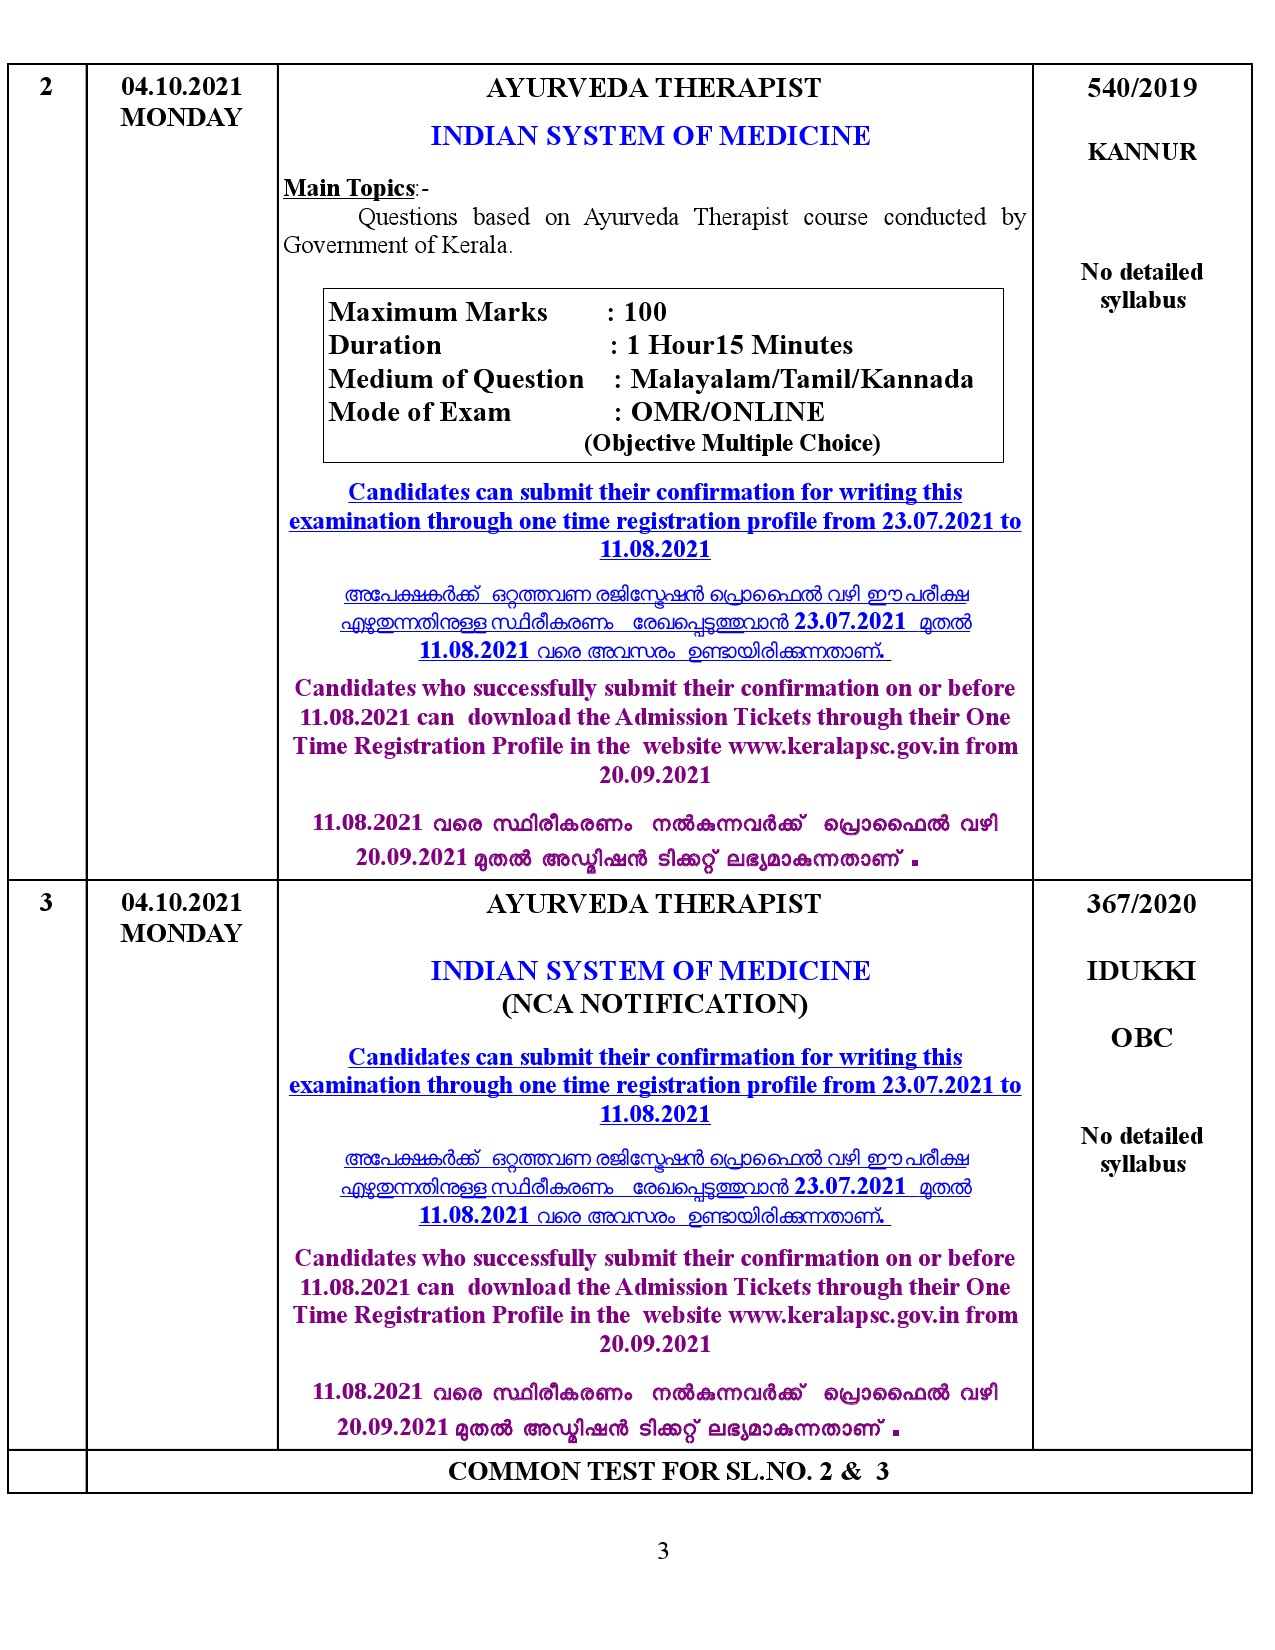 KPSC Examination Programme For The Month Of October 2021 - Notification Image 3